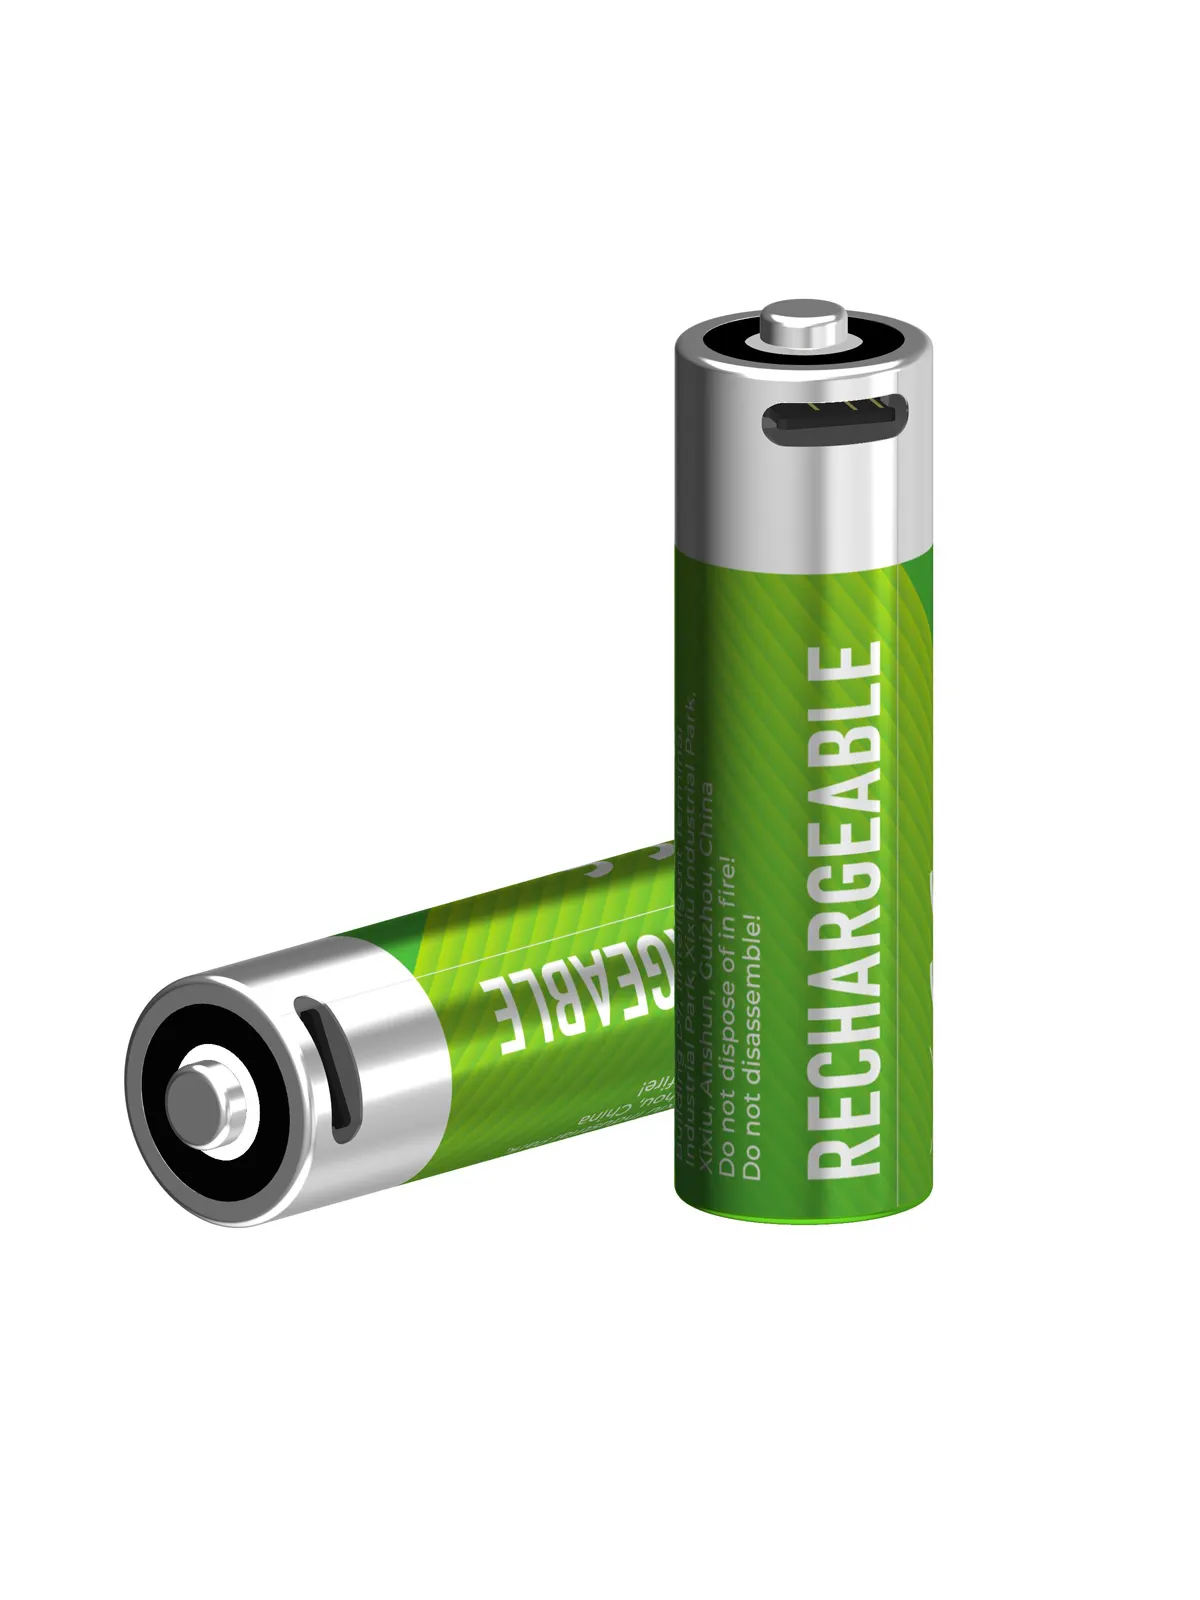 High Capacity Eco-friendly And Safety Rechargeable Batteries 1.5v Aa Recargable With Usb Port